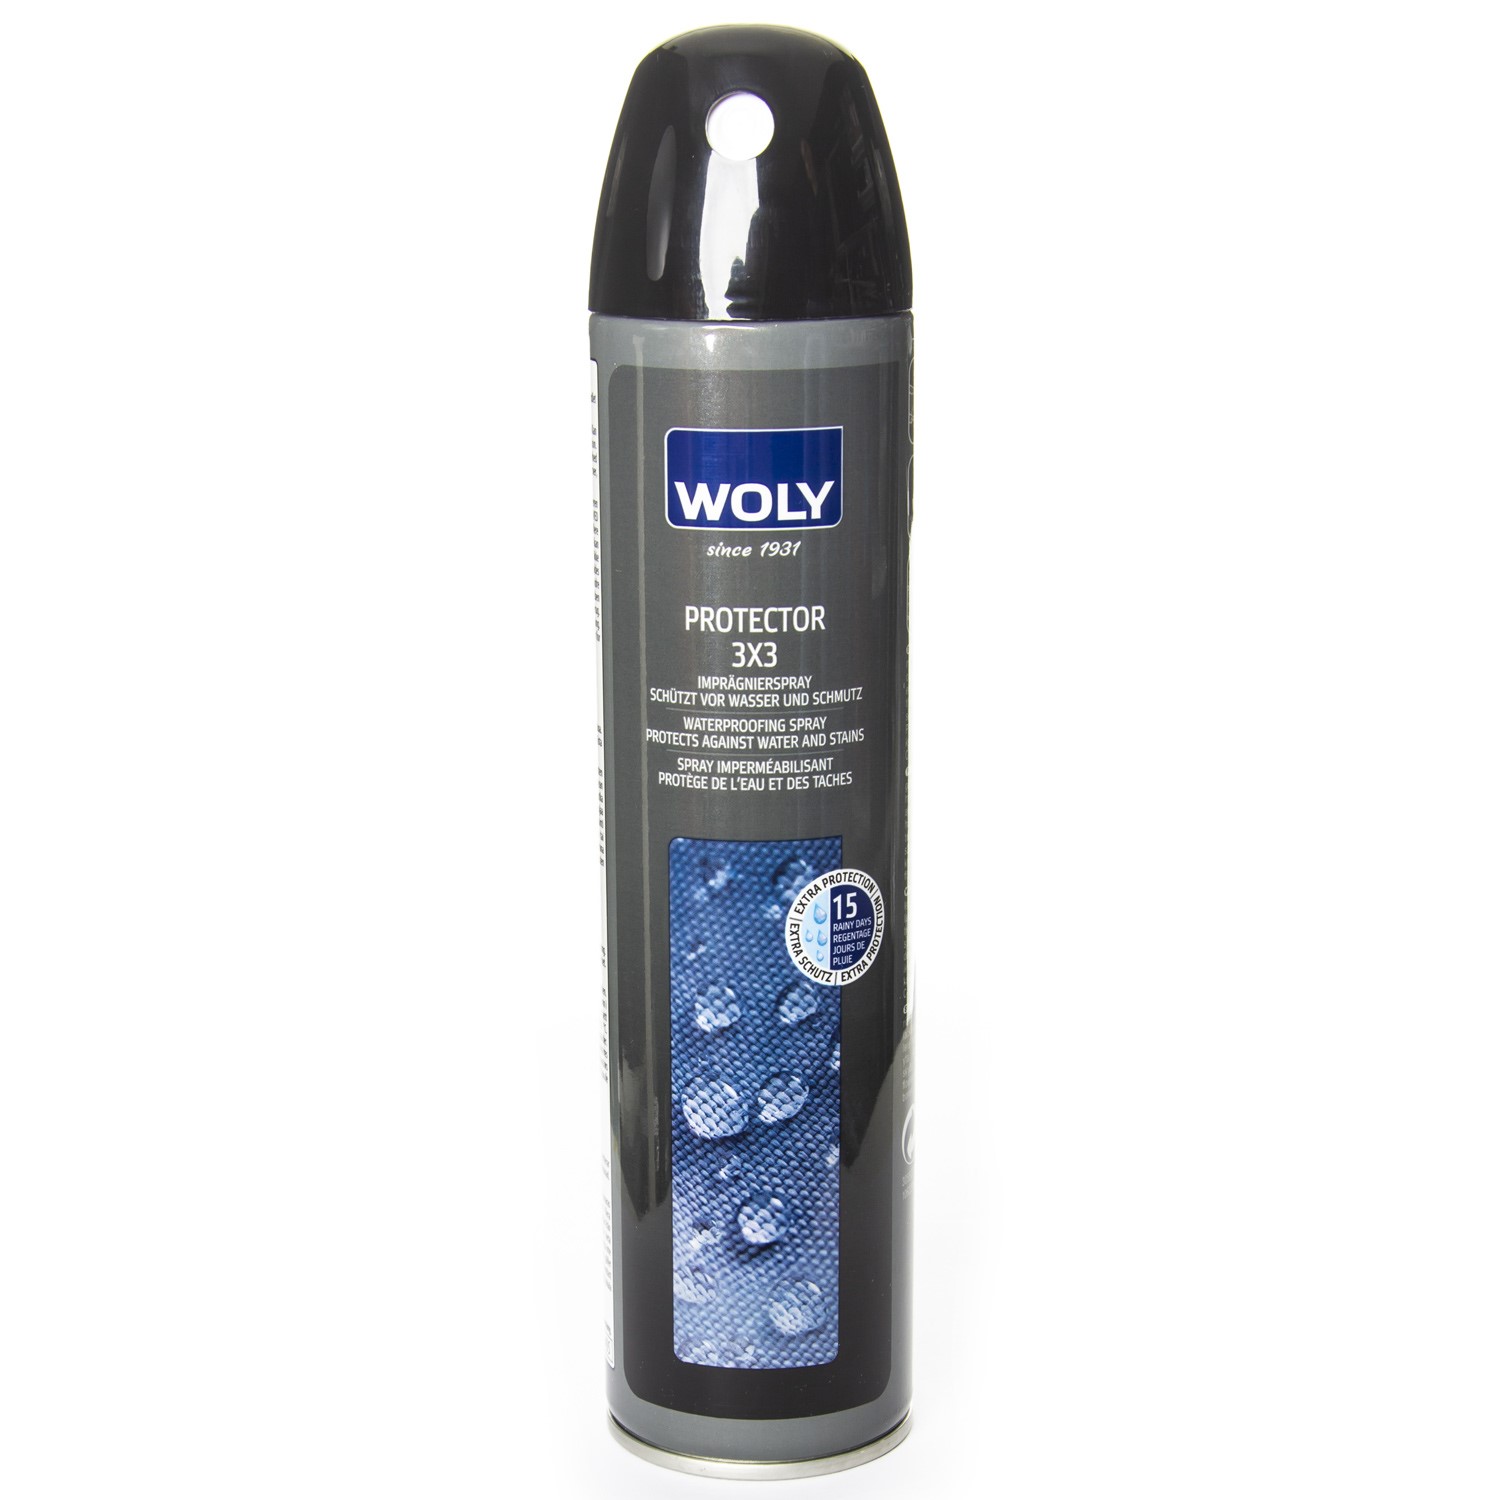 Woly Protector